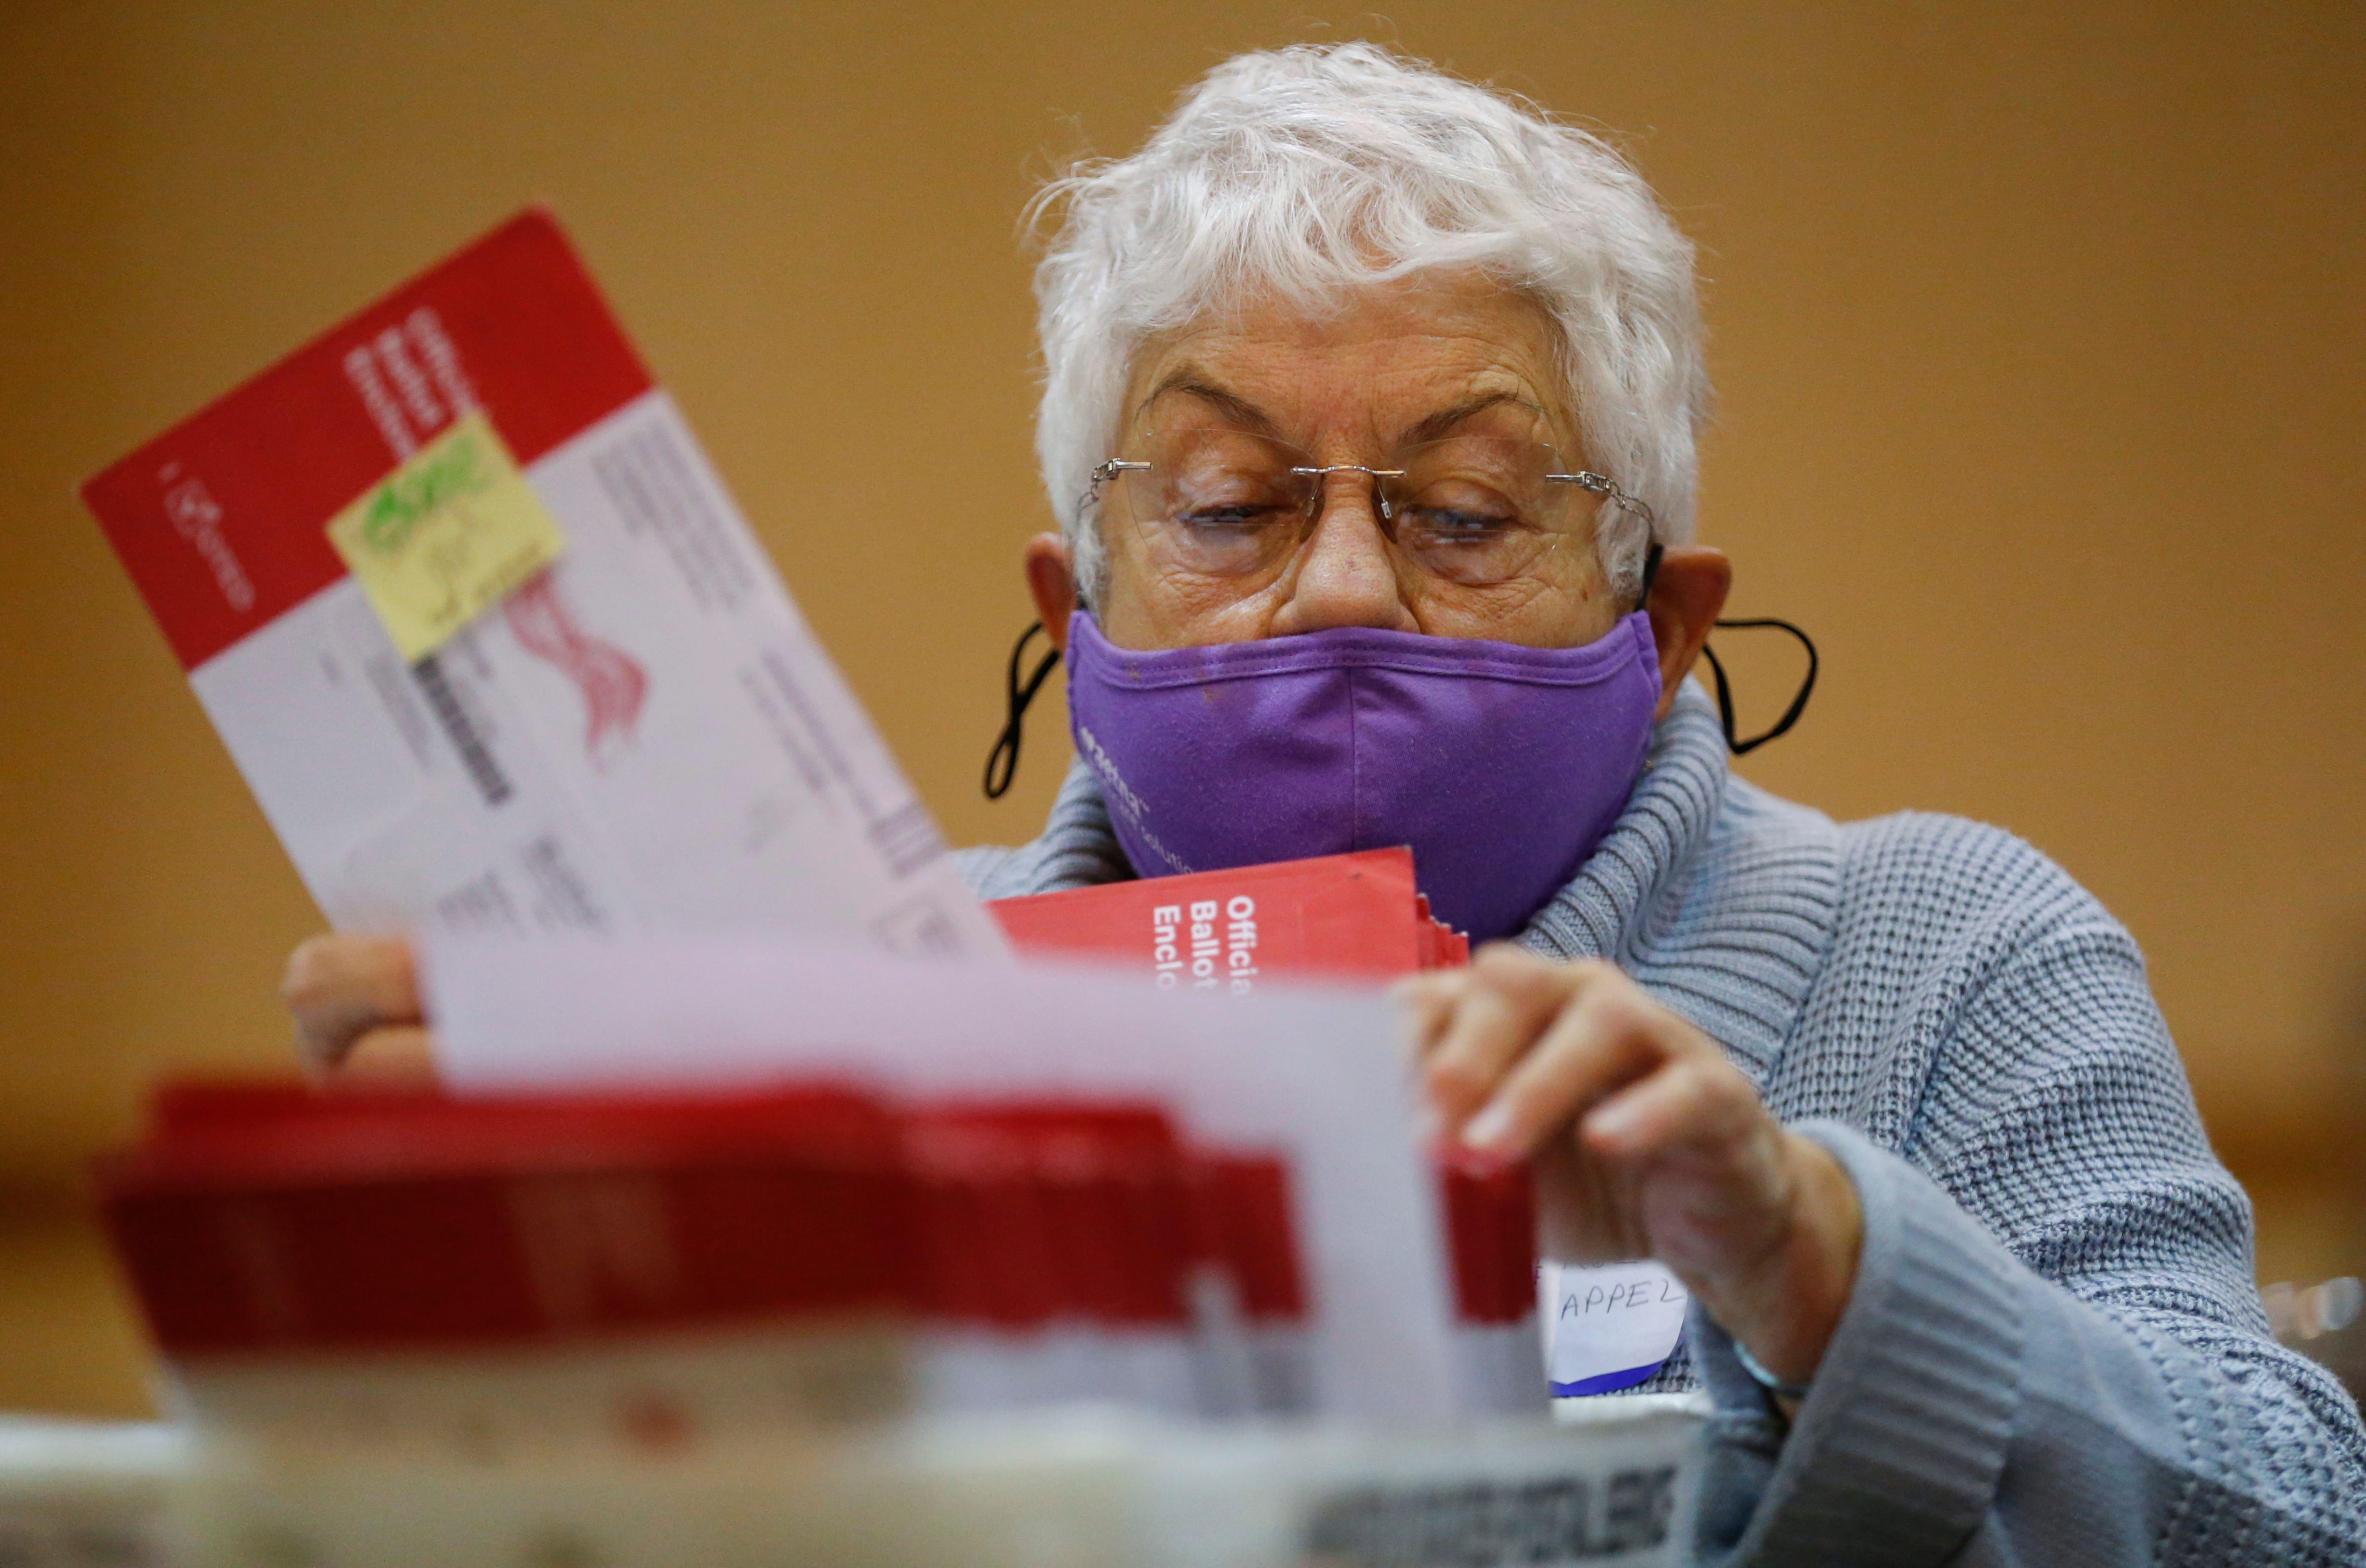 Carol Chappell sorts through absentee ballots at the University Plaza Convention Center on Thursday, Oct. 29, 2020.